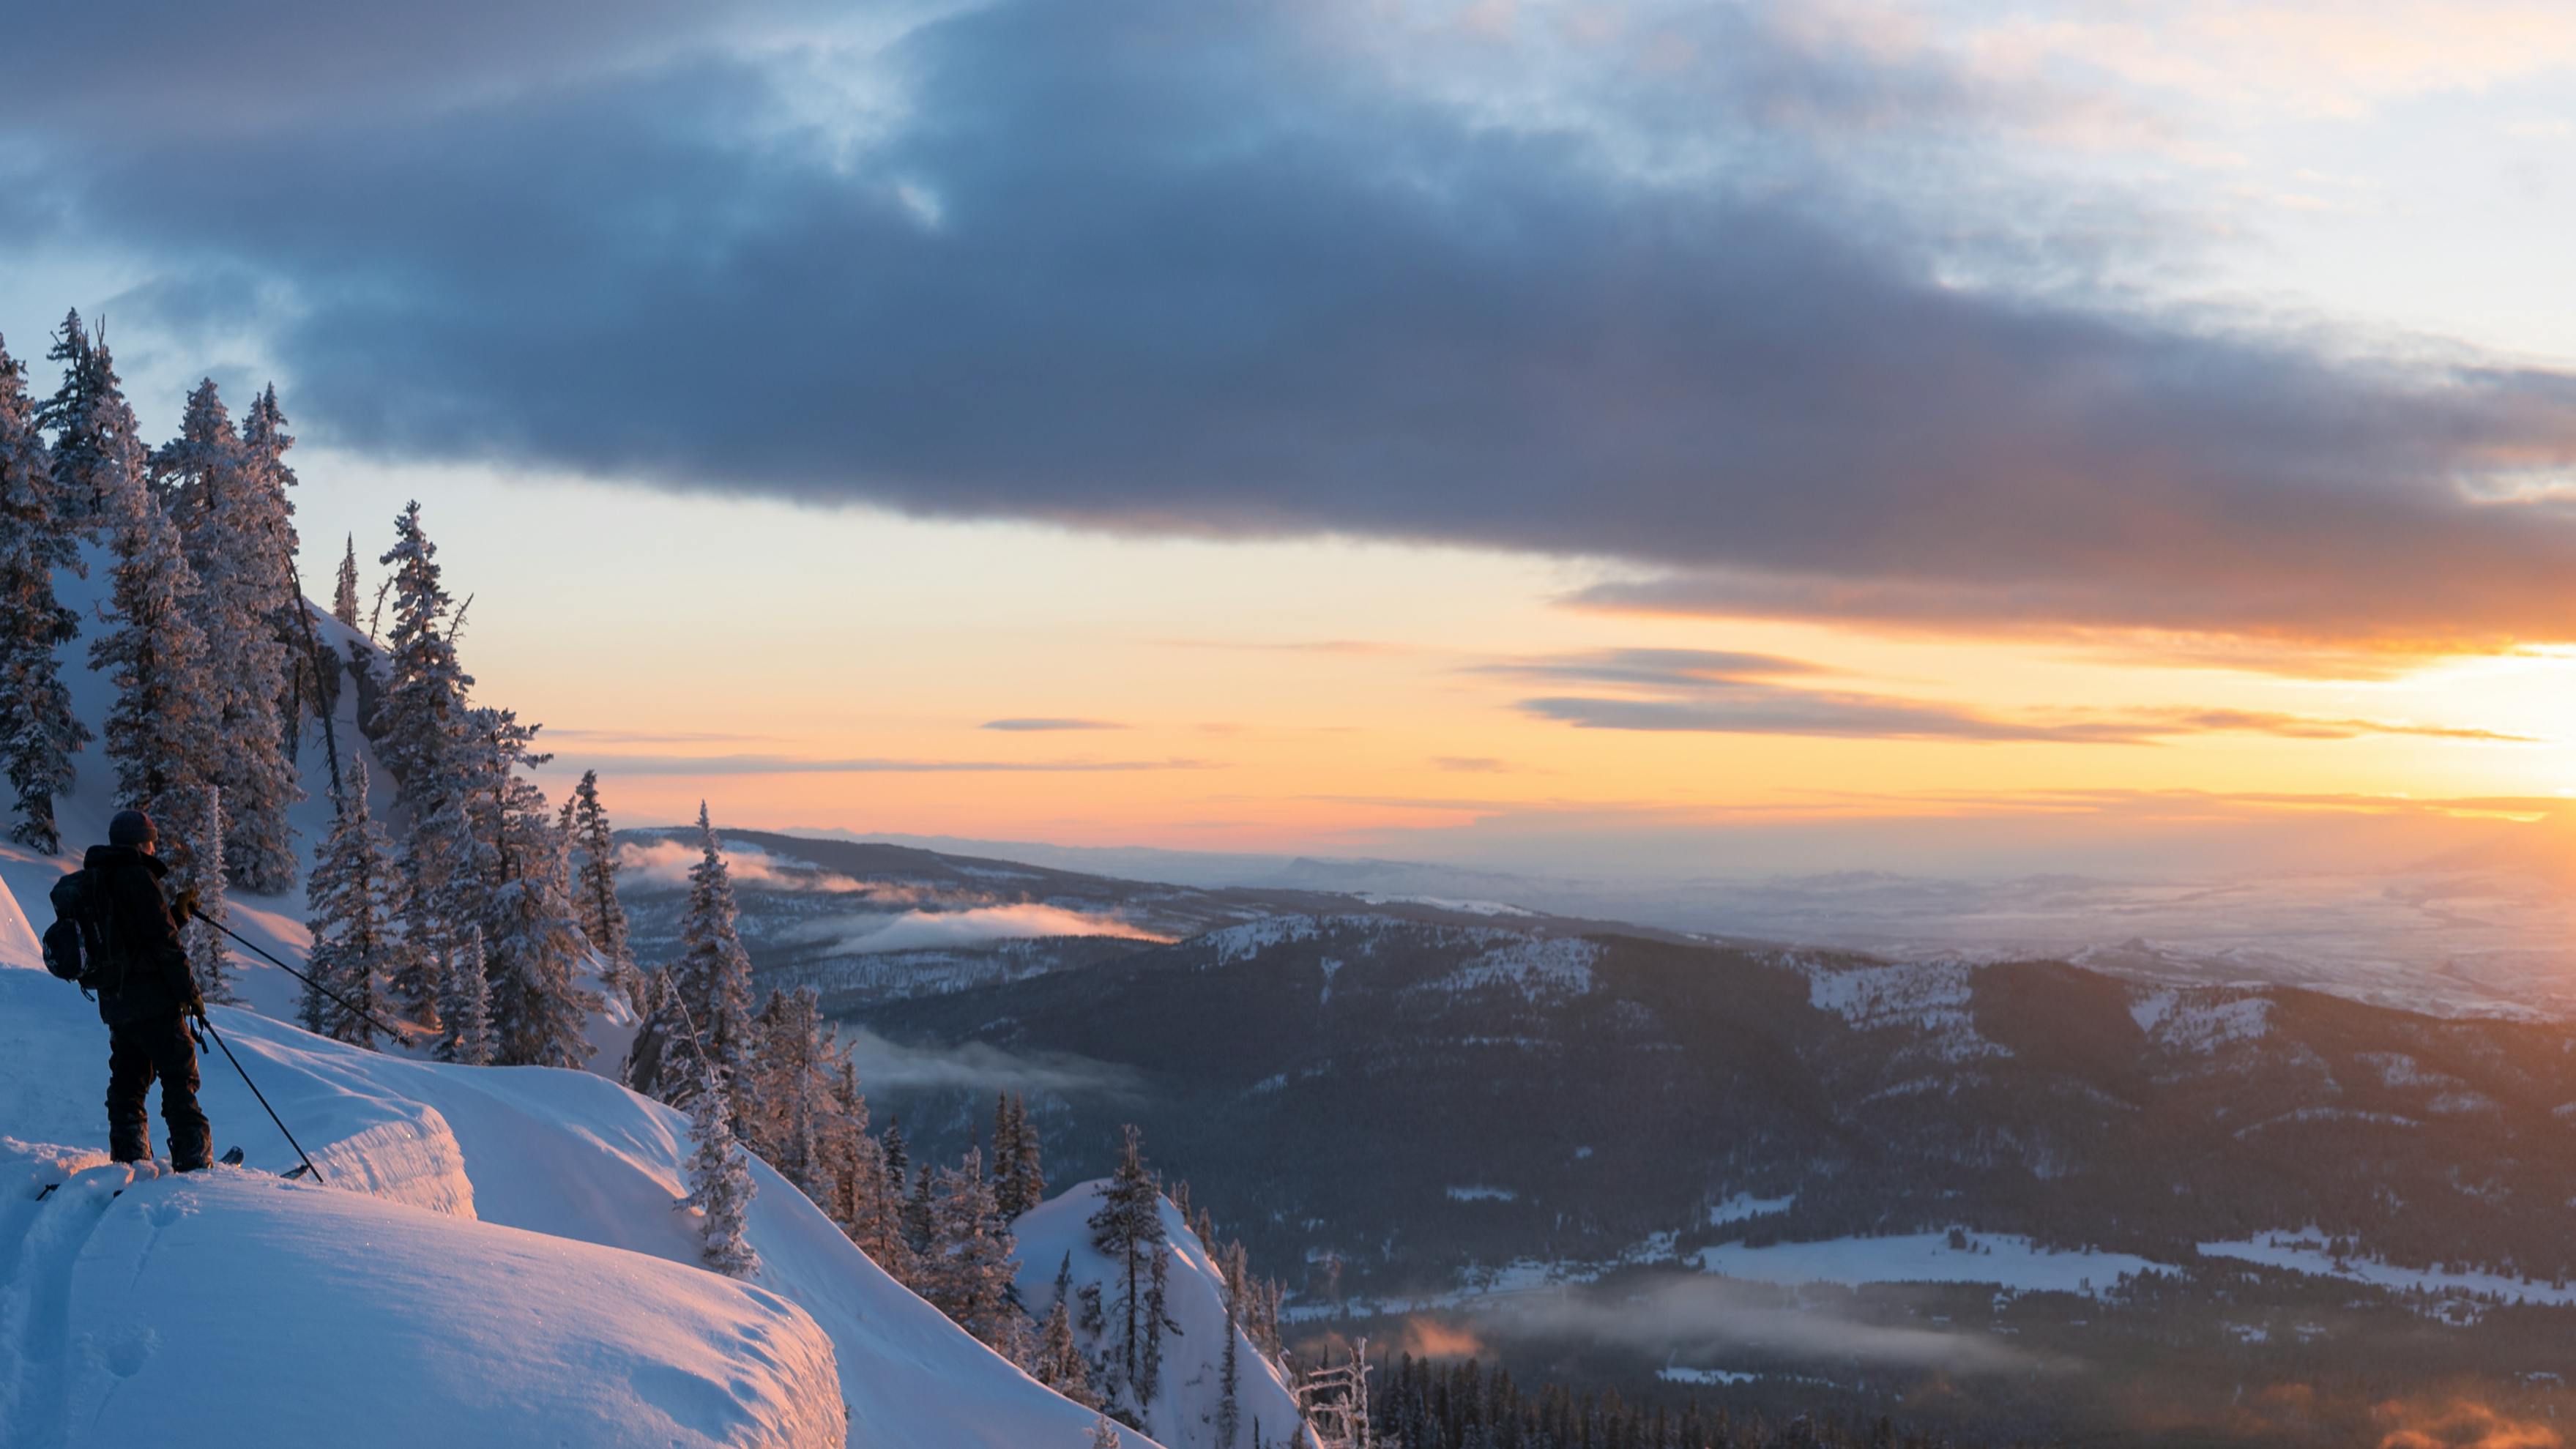 Two people on skis stand on a snowy hill and look out over the sunrise.